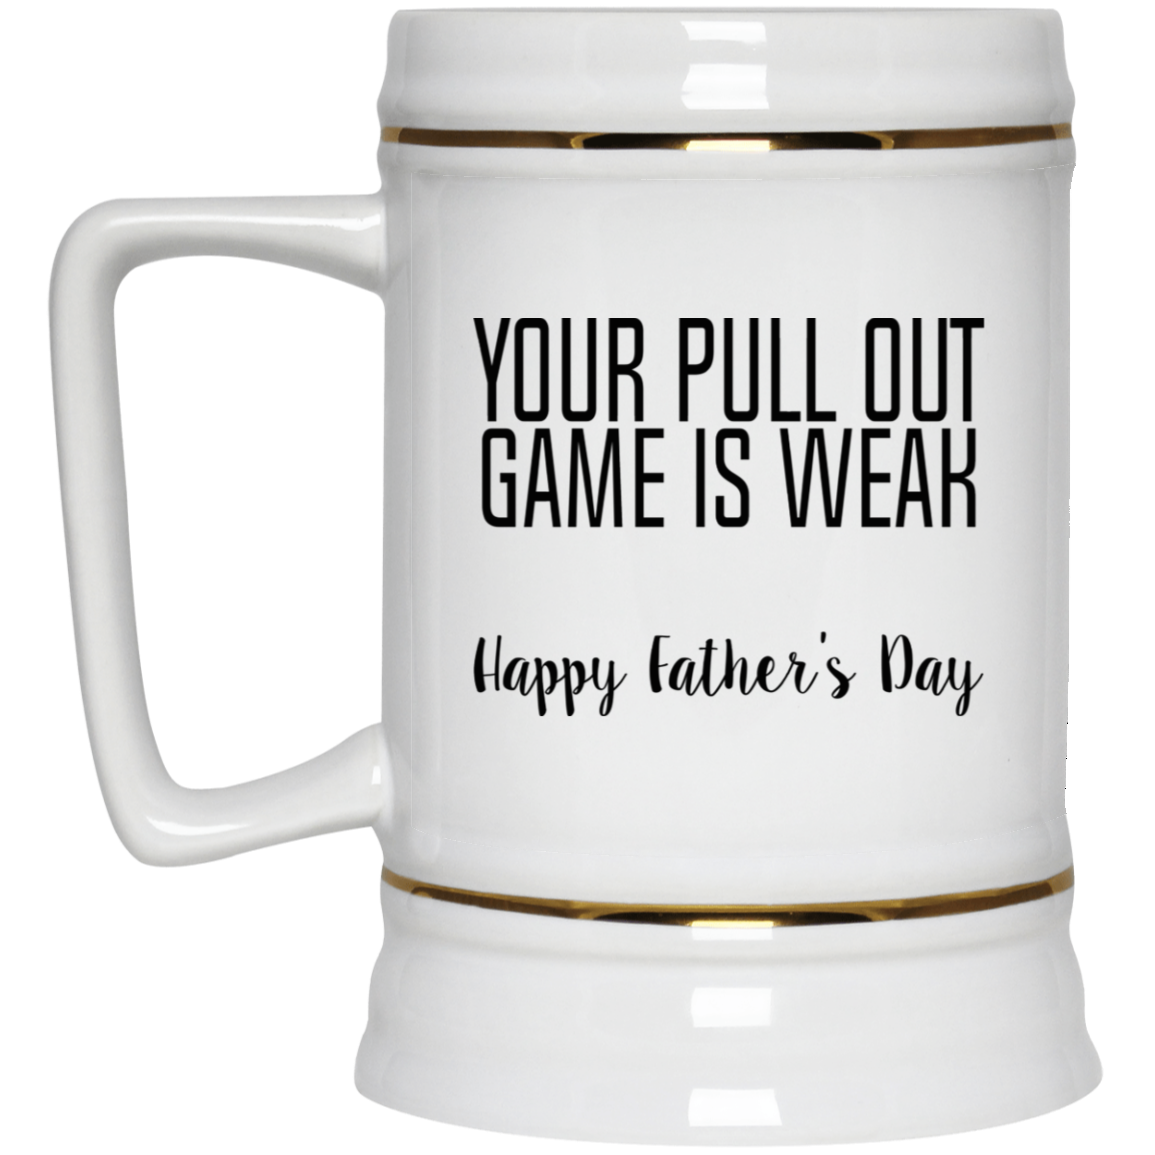 Funny Beer Stein 22 Oz Your Pull Out Game is weak Happy Fathers Day